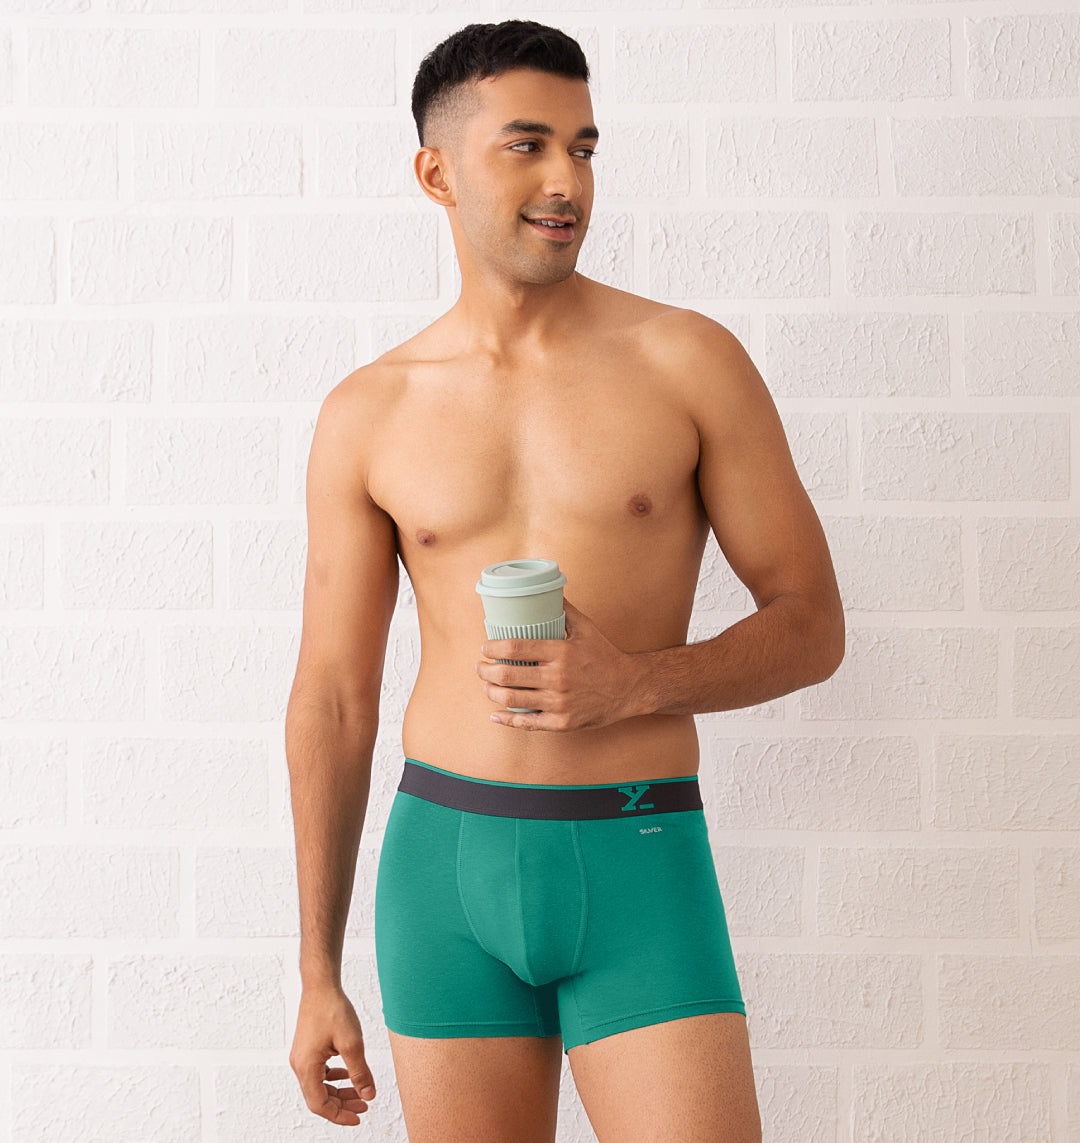 How To Choose One Underwear Fabric For All Seasons?